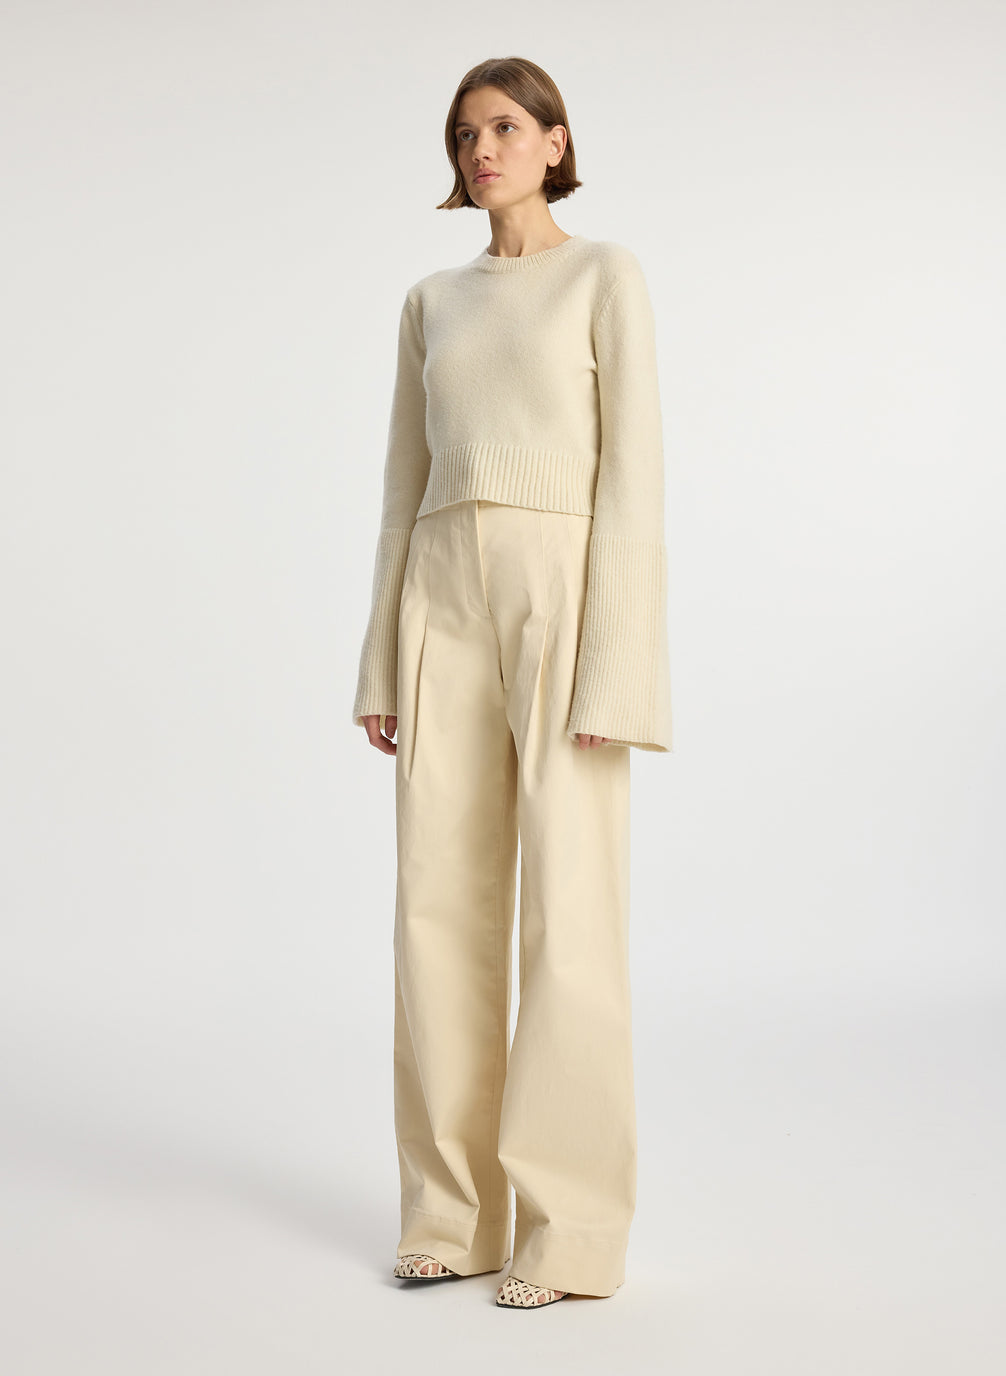 side view of woman wearing cream sweater and beige pants